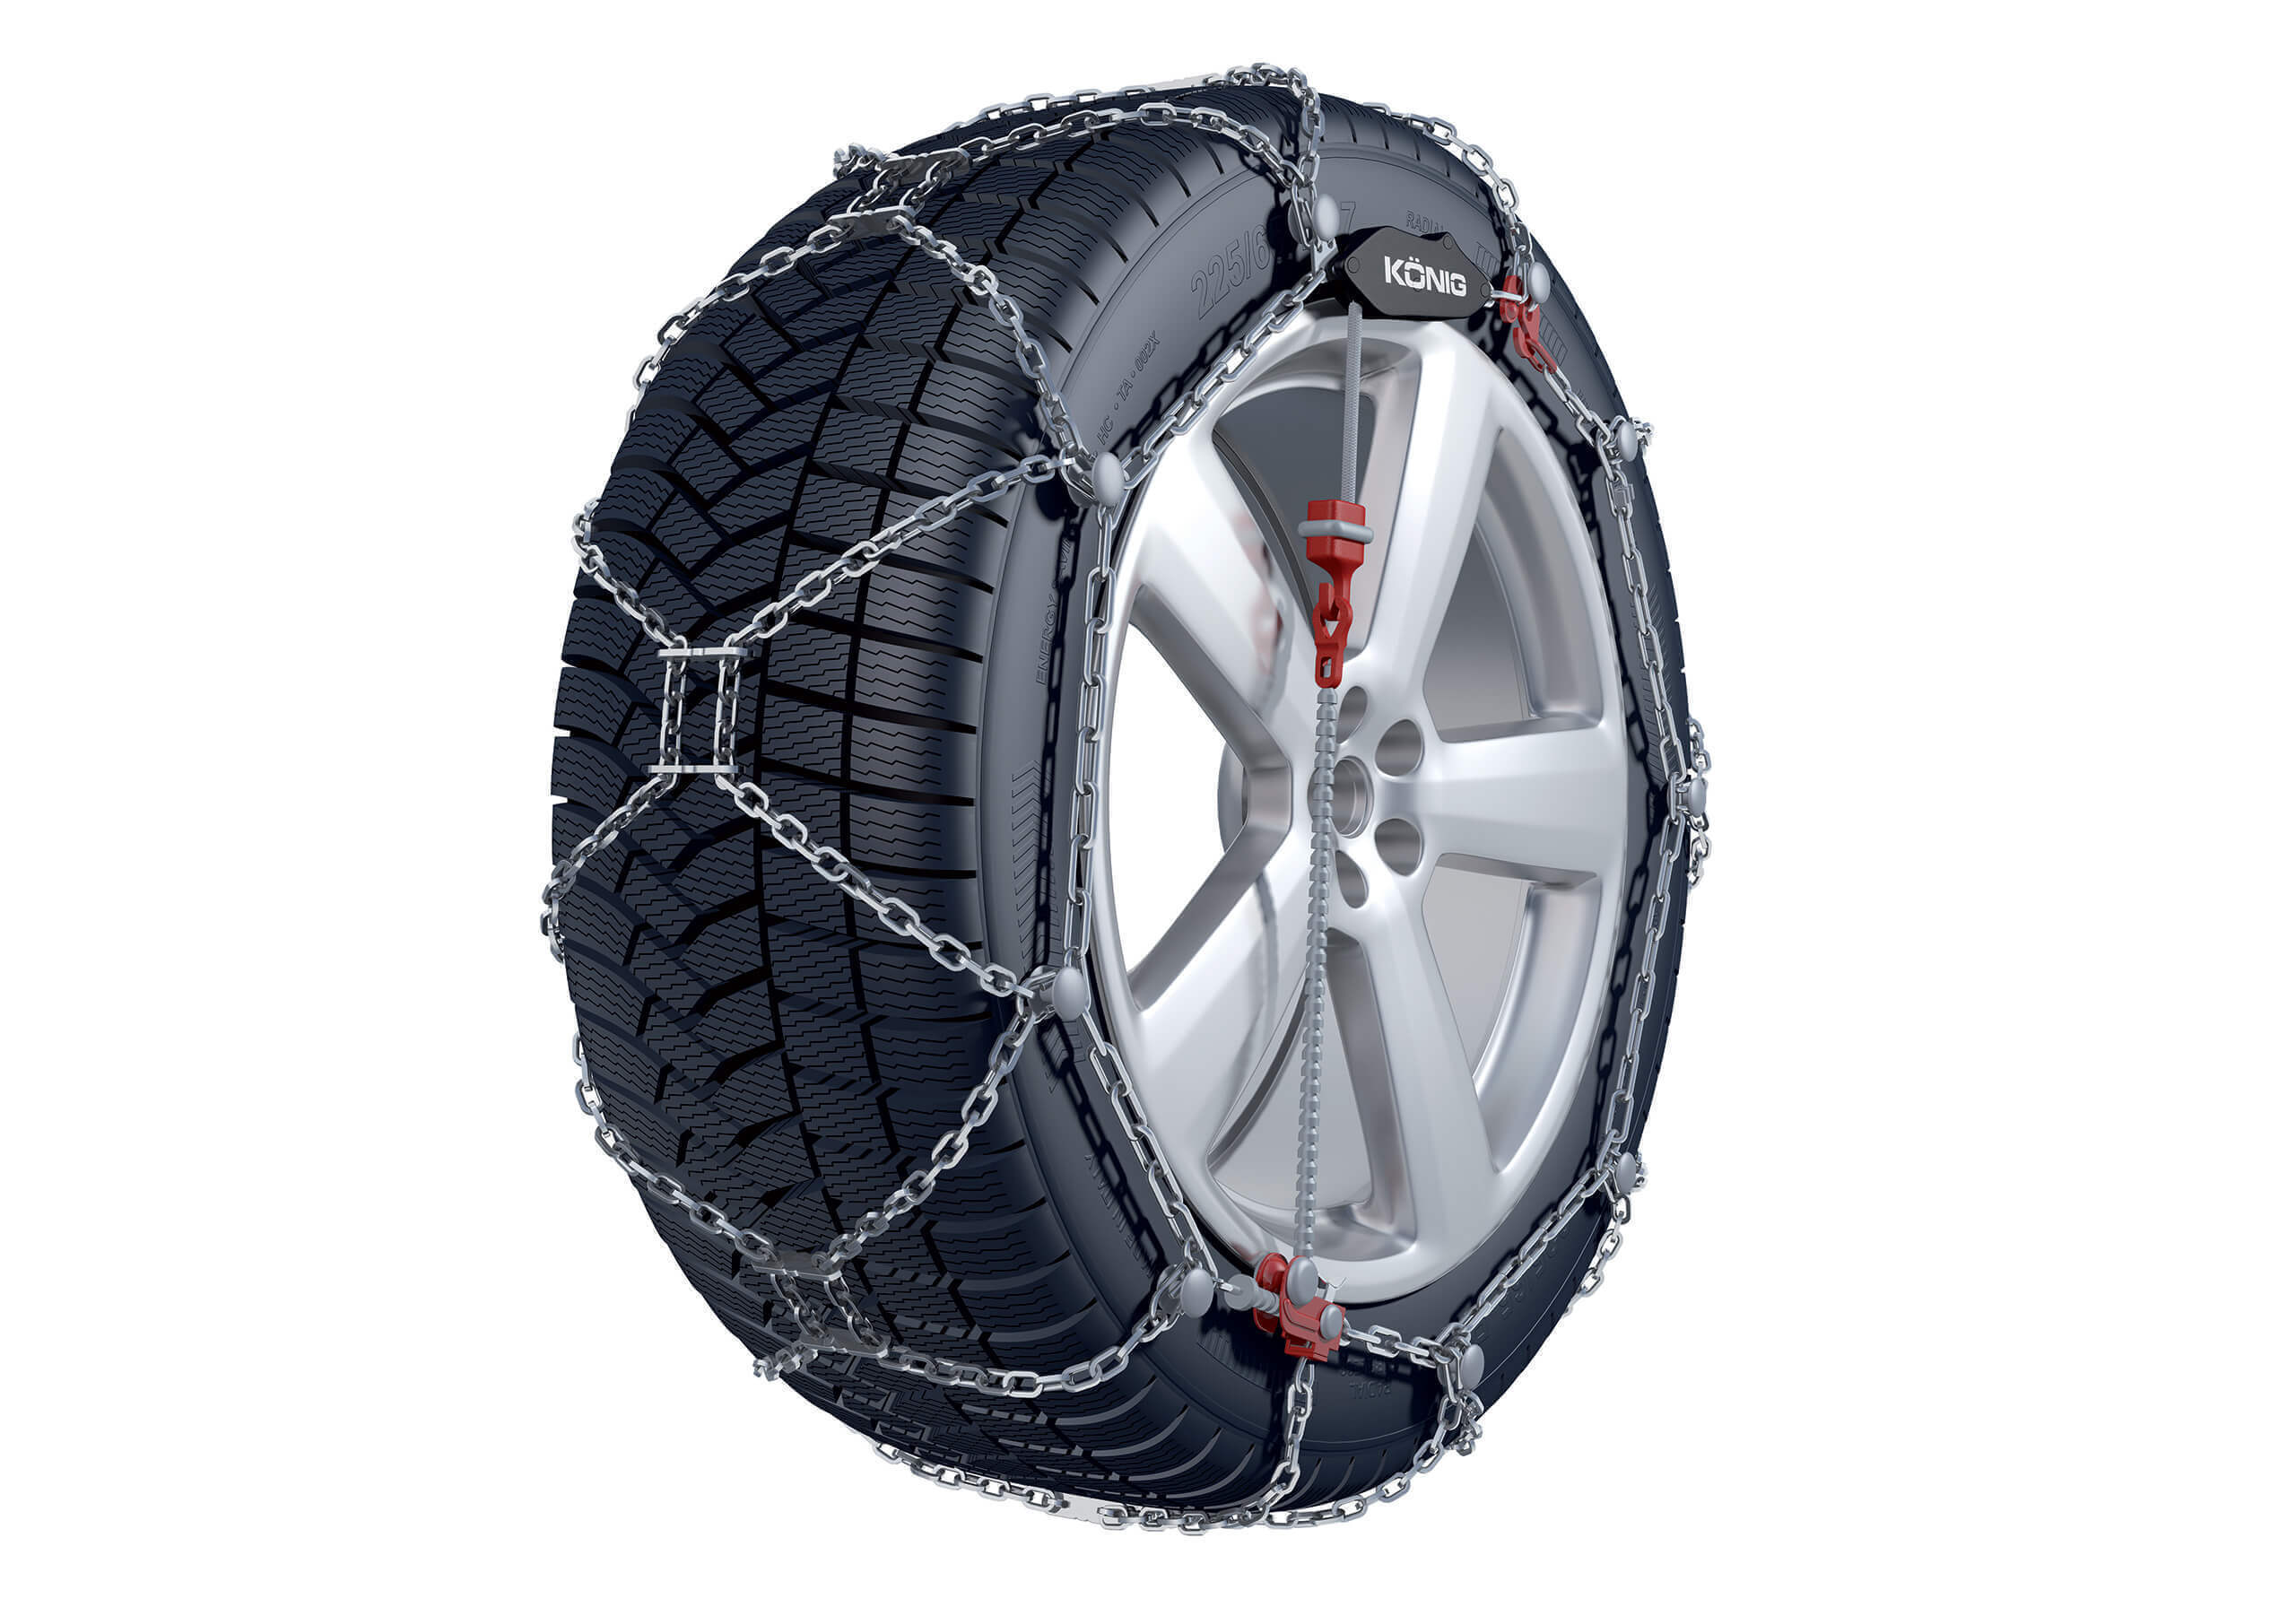 Iveco Daily L2 H1 (2006 to 2014):Knig XG-12 Pro snow chains (pair) no. KGXG-12 Pro 220